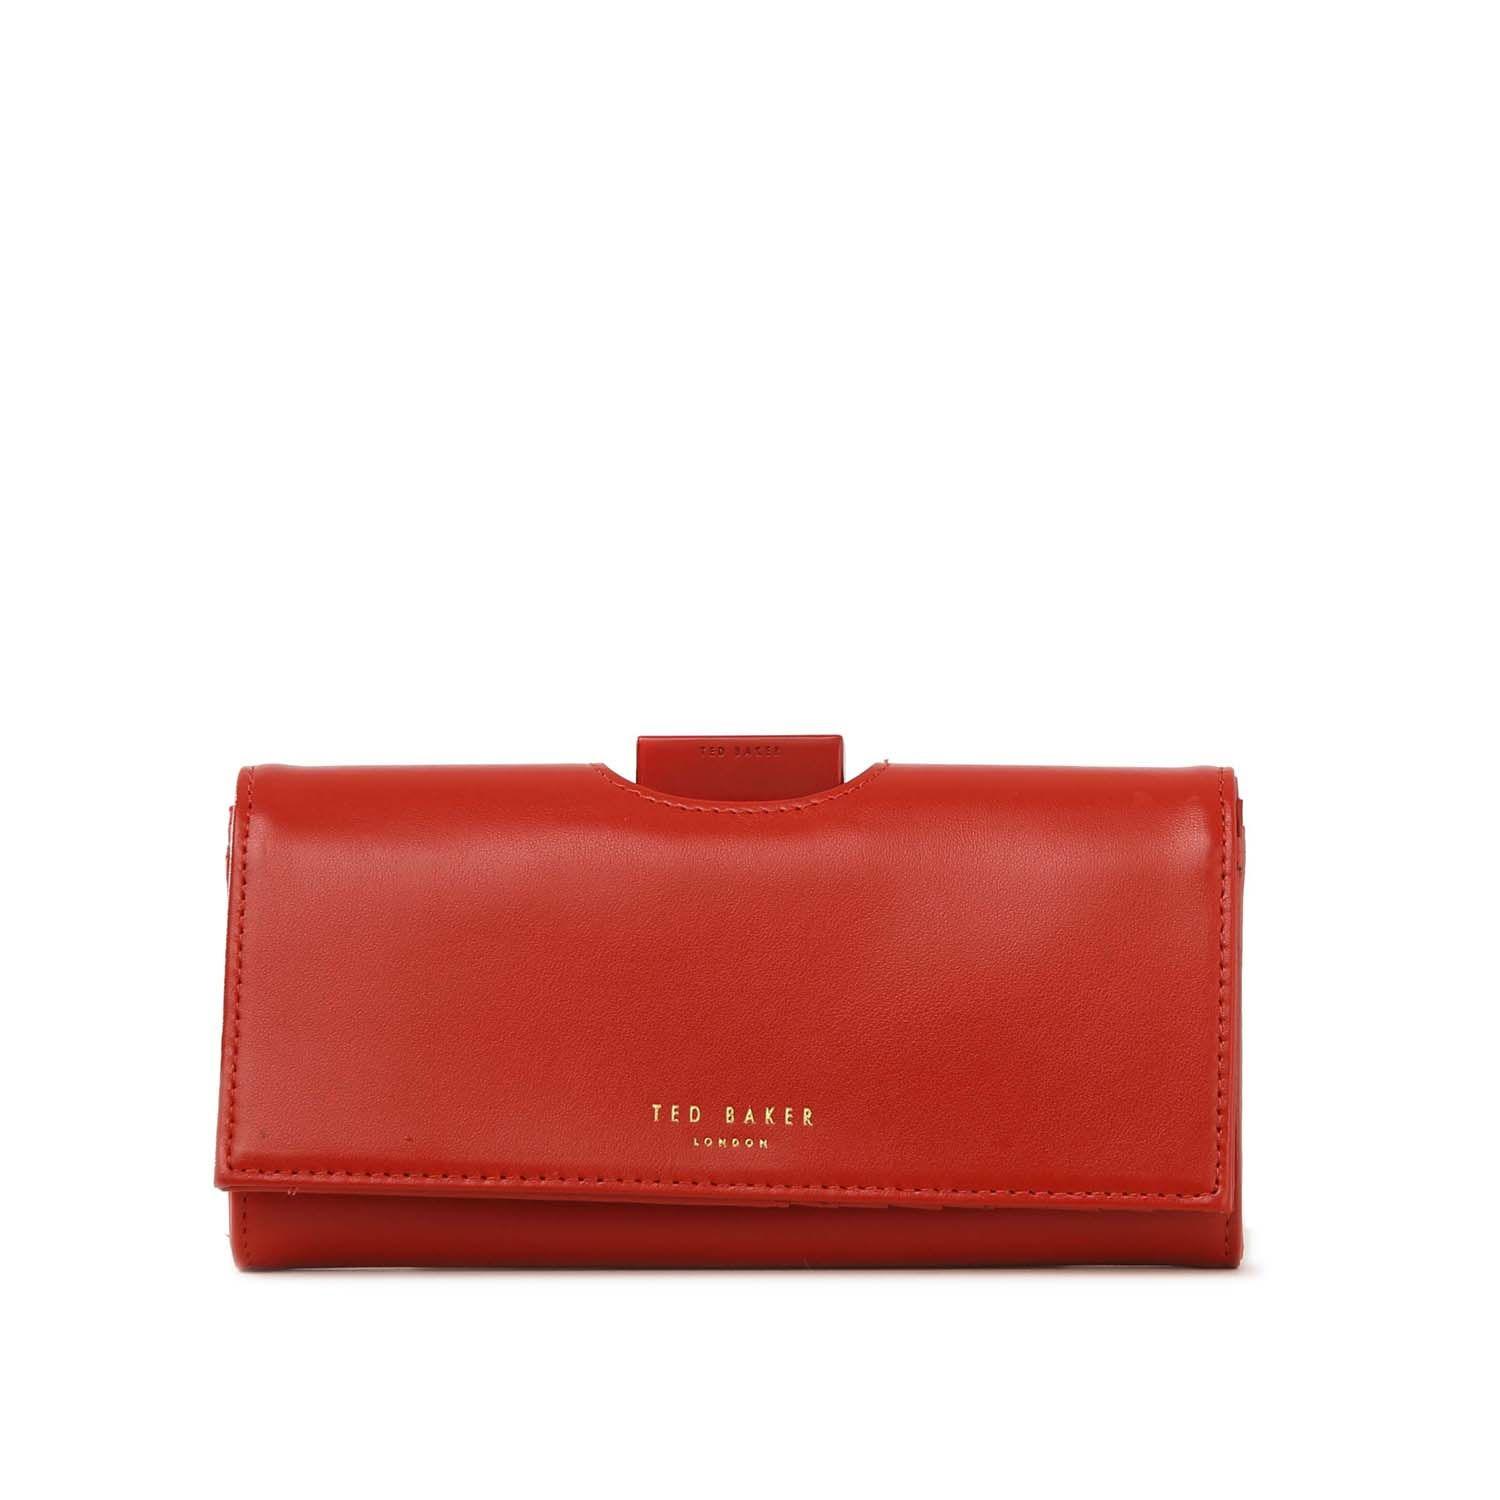 TED BAKER RED Purse With Box £26.00 - PicClick UK